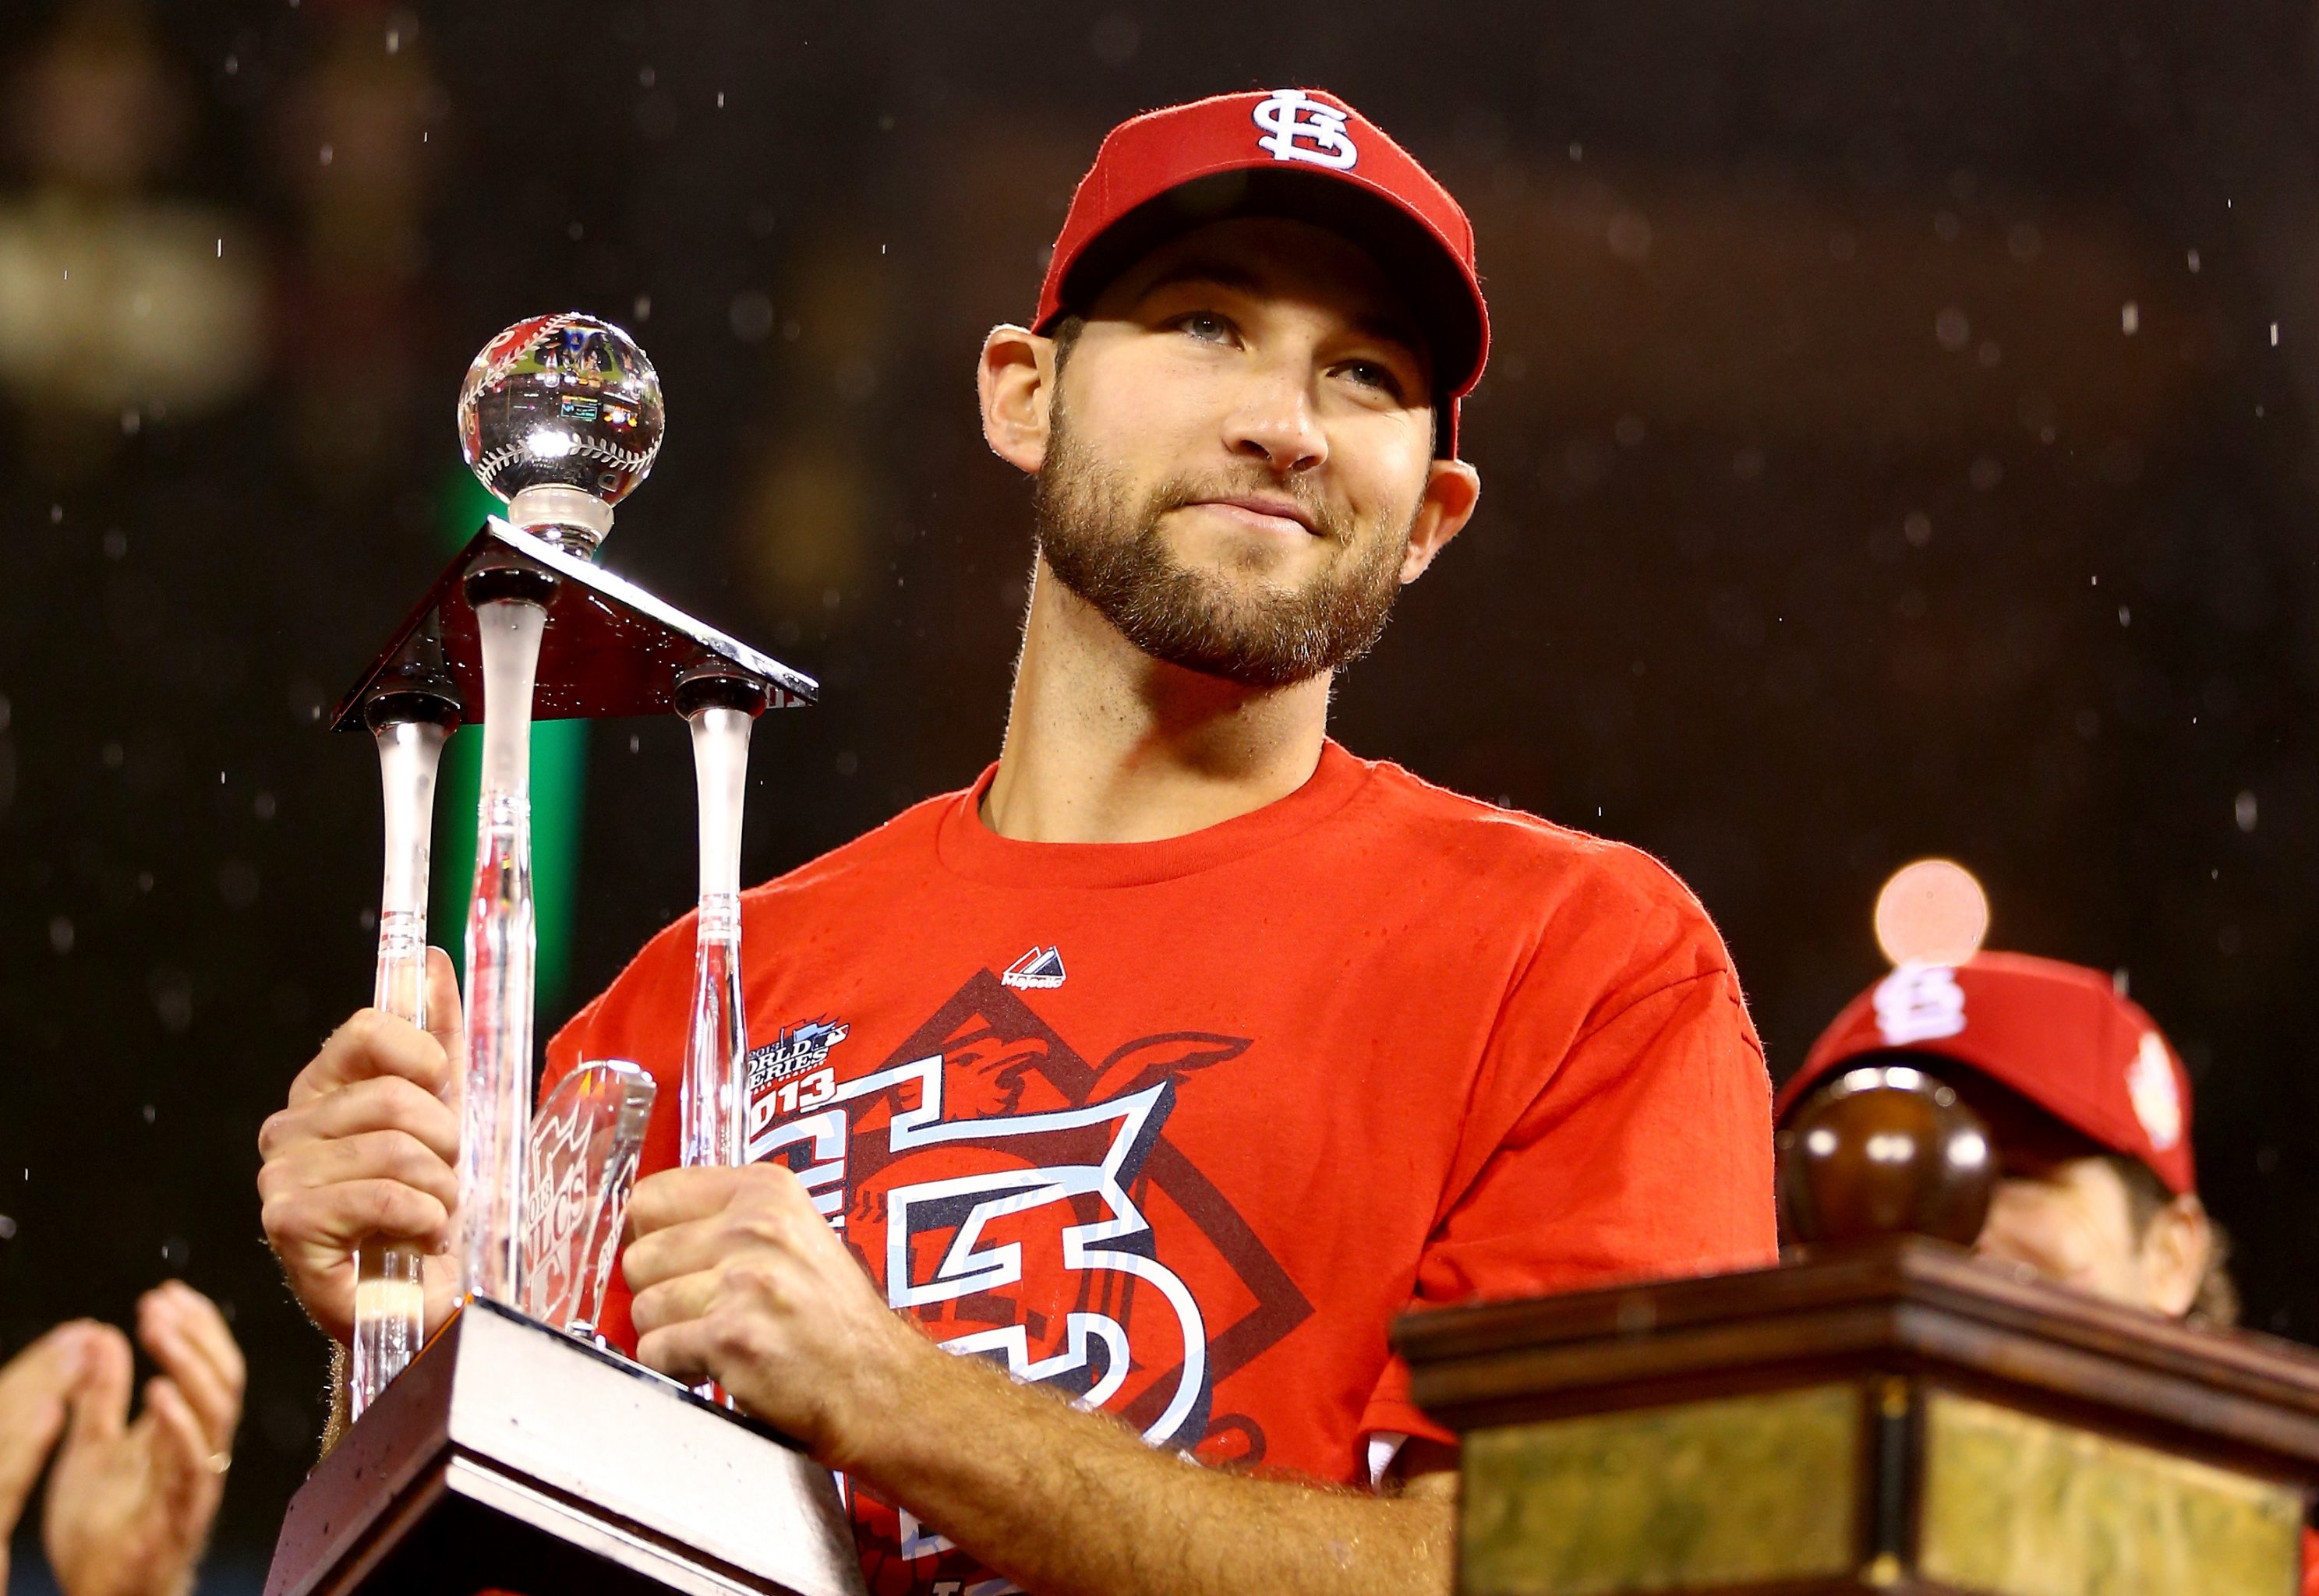 World Series 2013: Recapping Most Memorable Moments from MLB